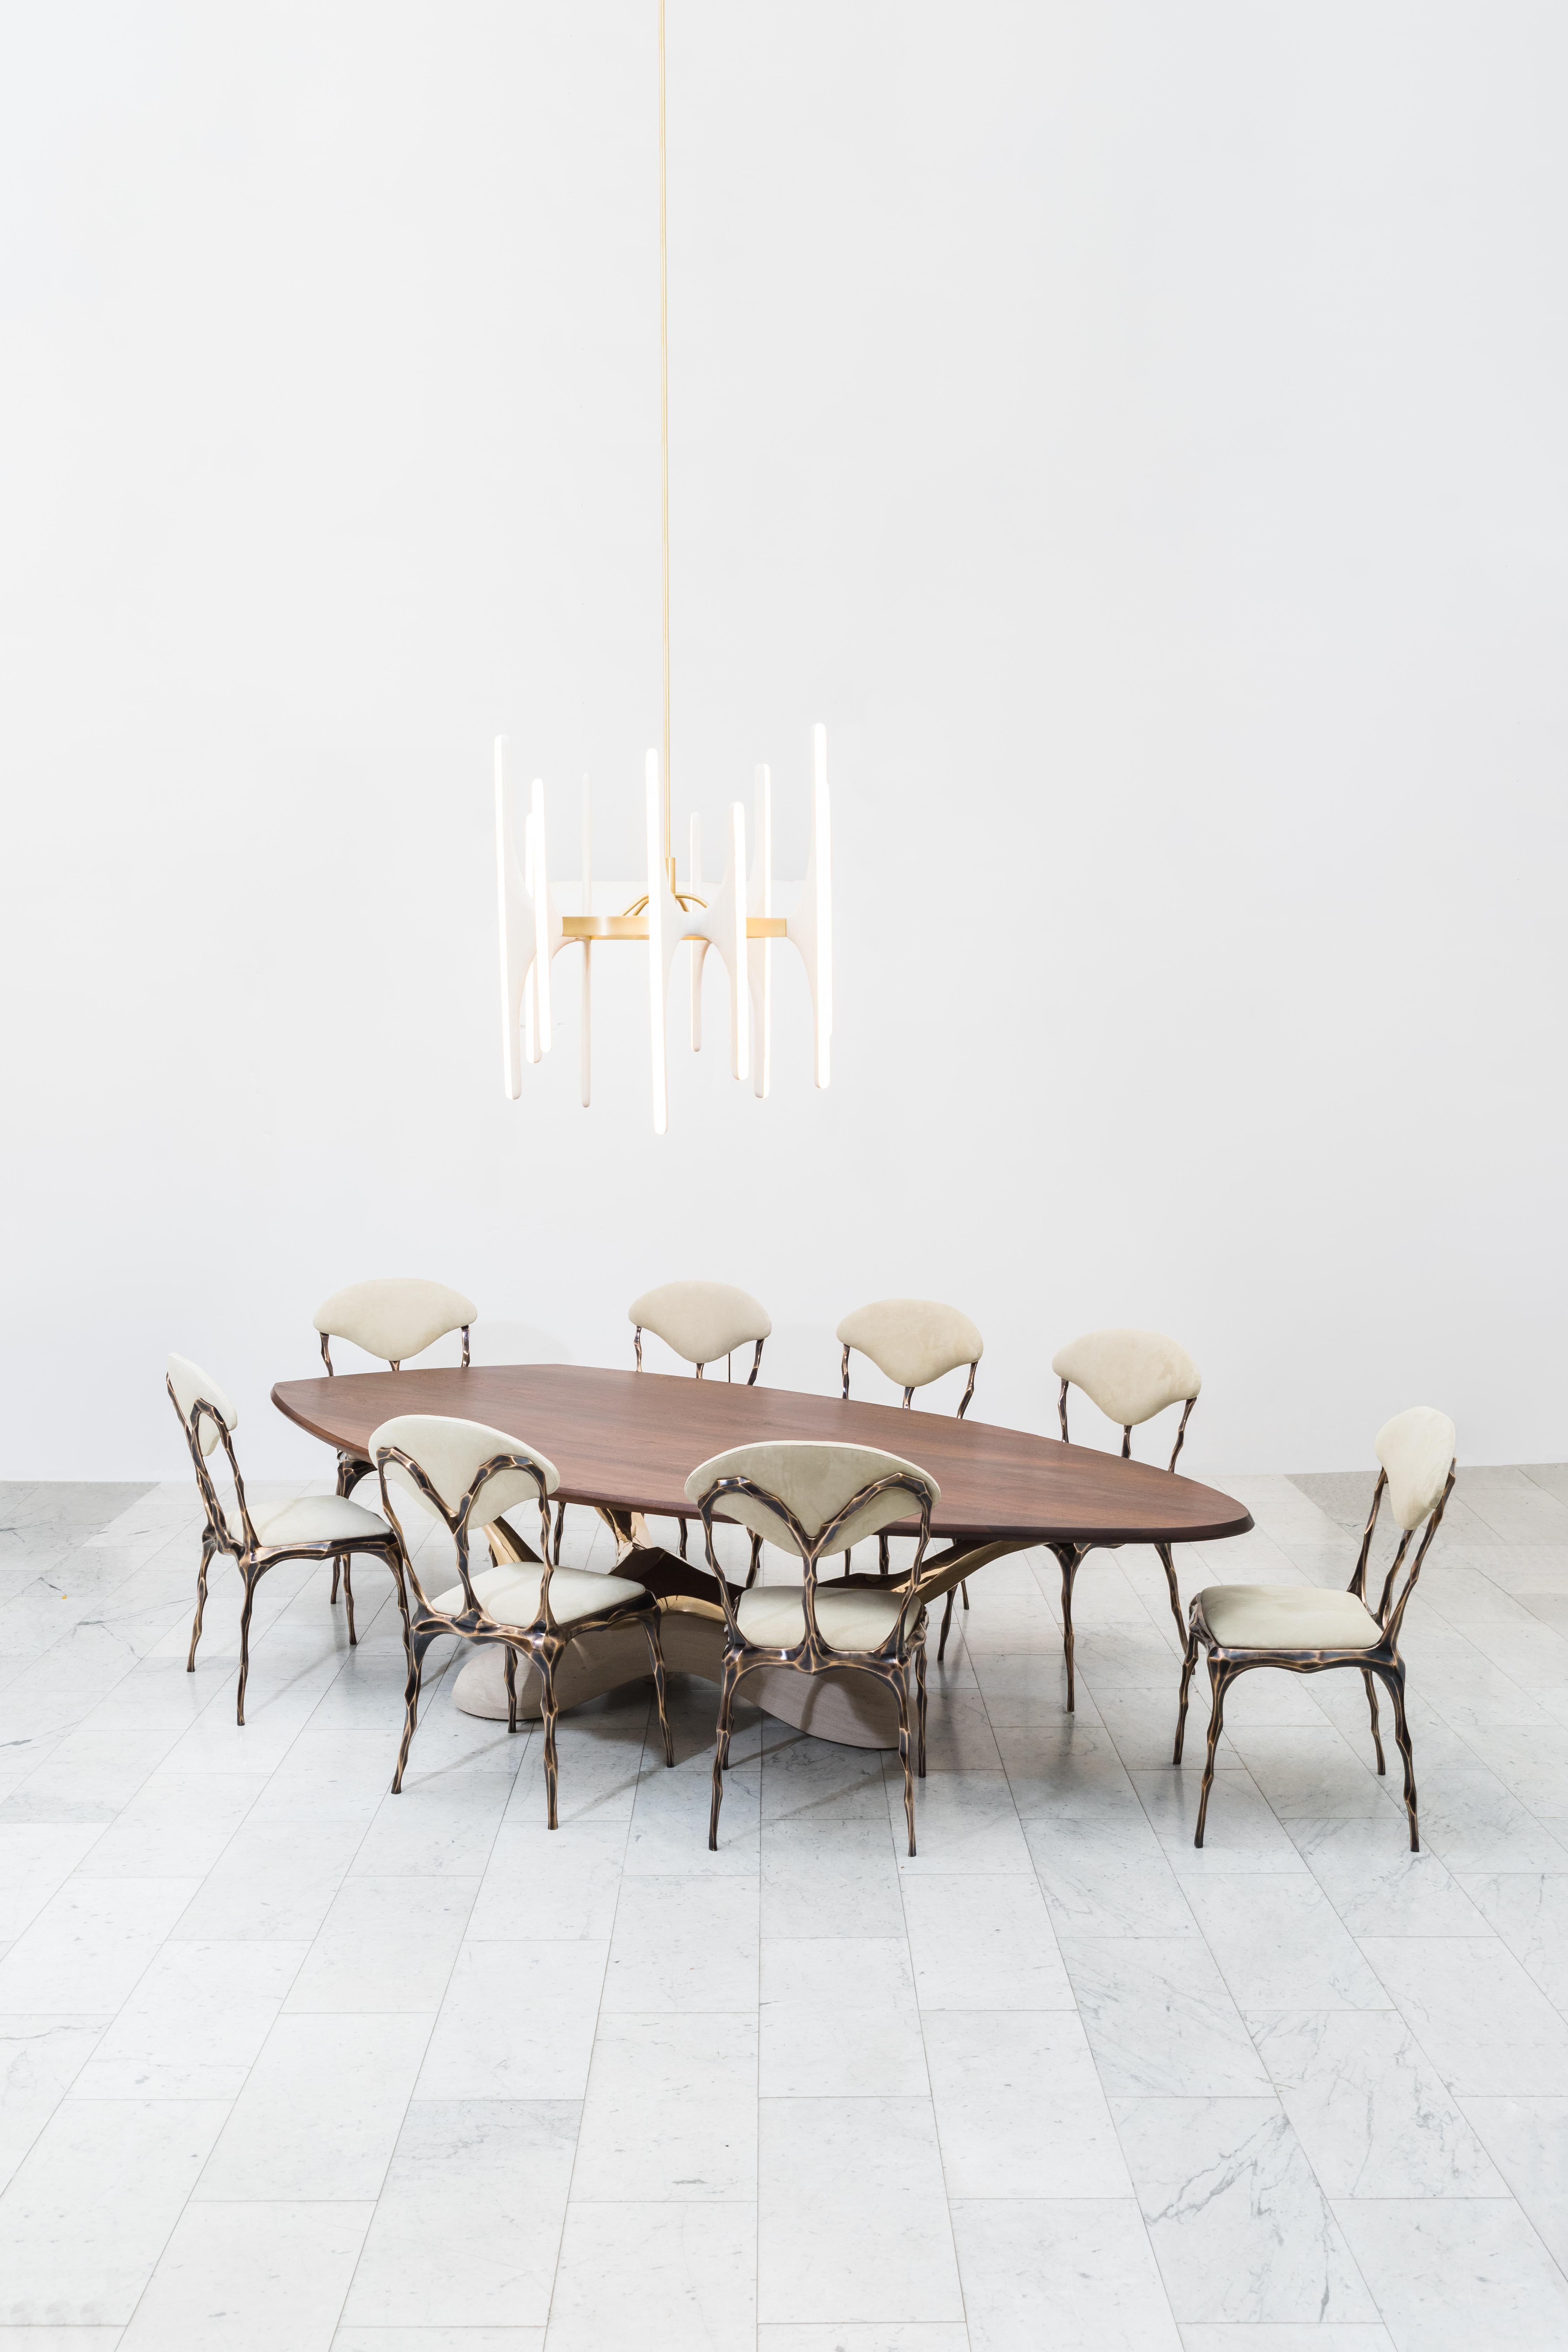 Markus Haase’s one-of-a-kind 12-foot handcrafted dining table features a sculpted American black walnut top resting on a bronze tripod, supported by a carved limestone base. The organically shaped bronze tripod is sculpted in foam and then cast in